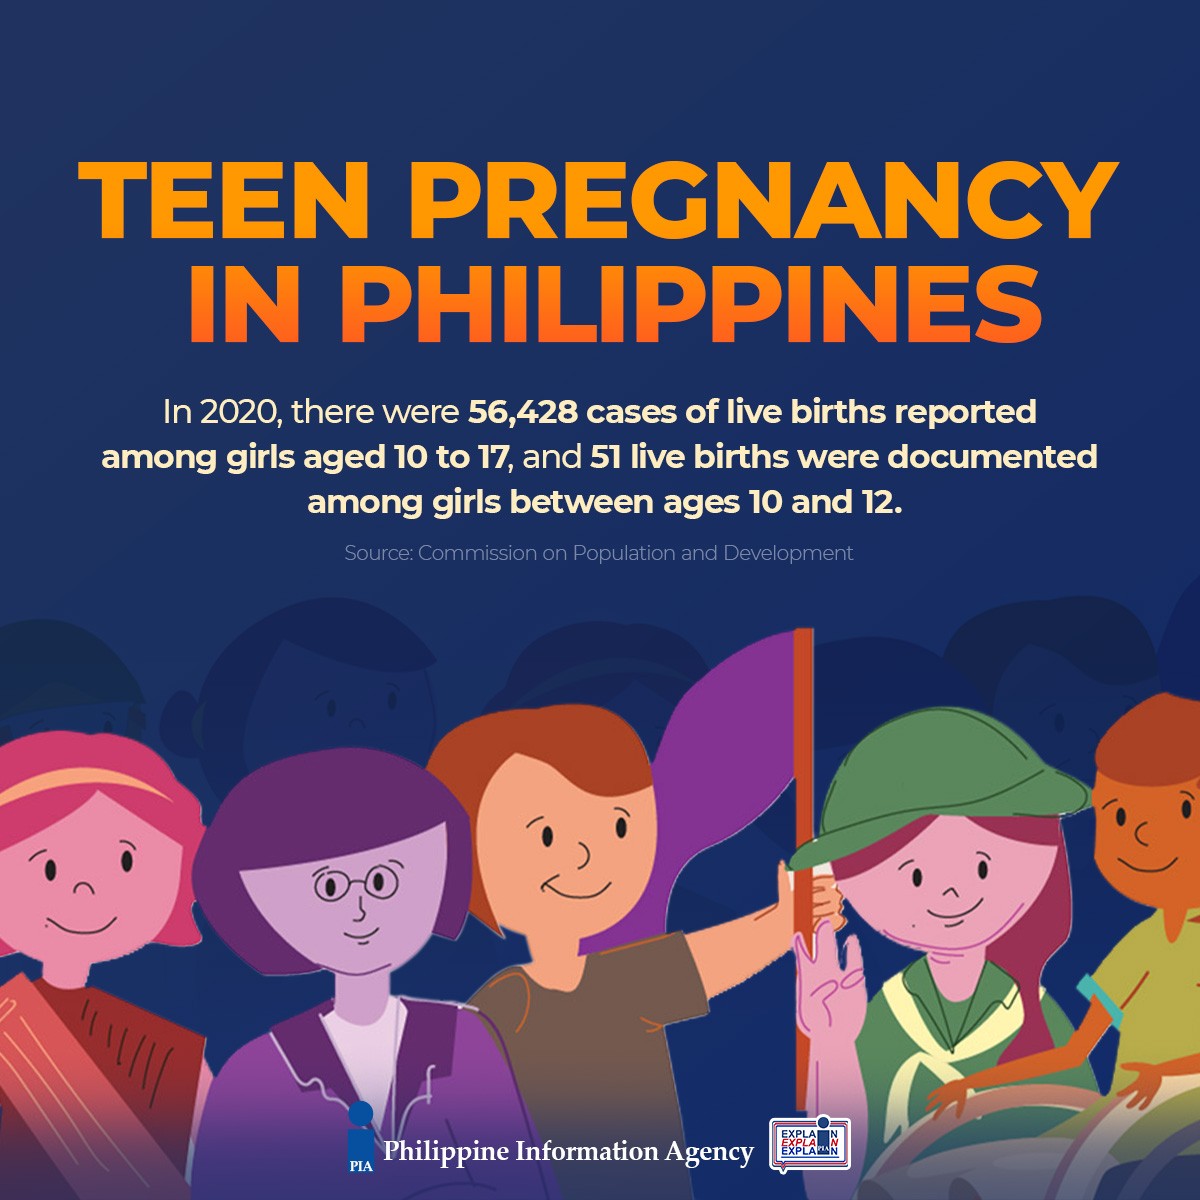 Teen Pregnancy in the Philippines